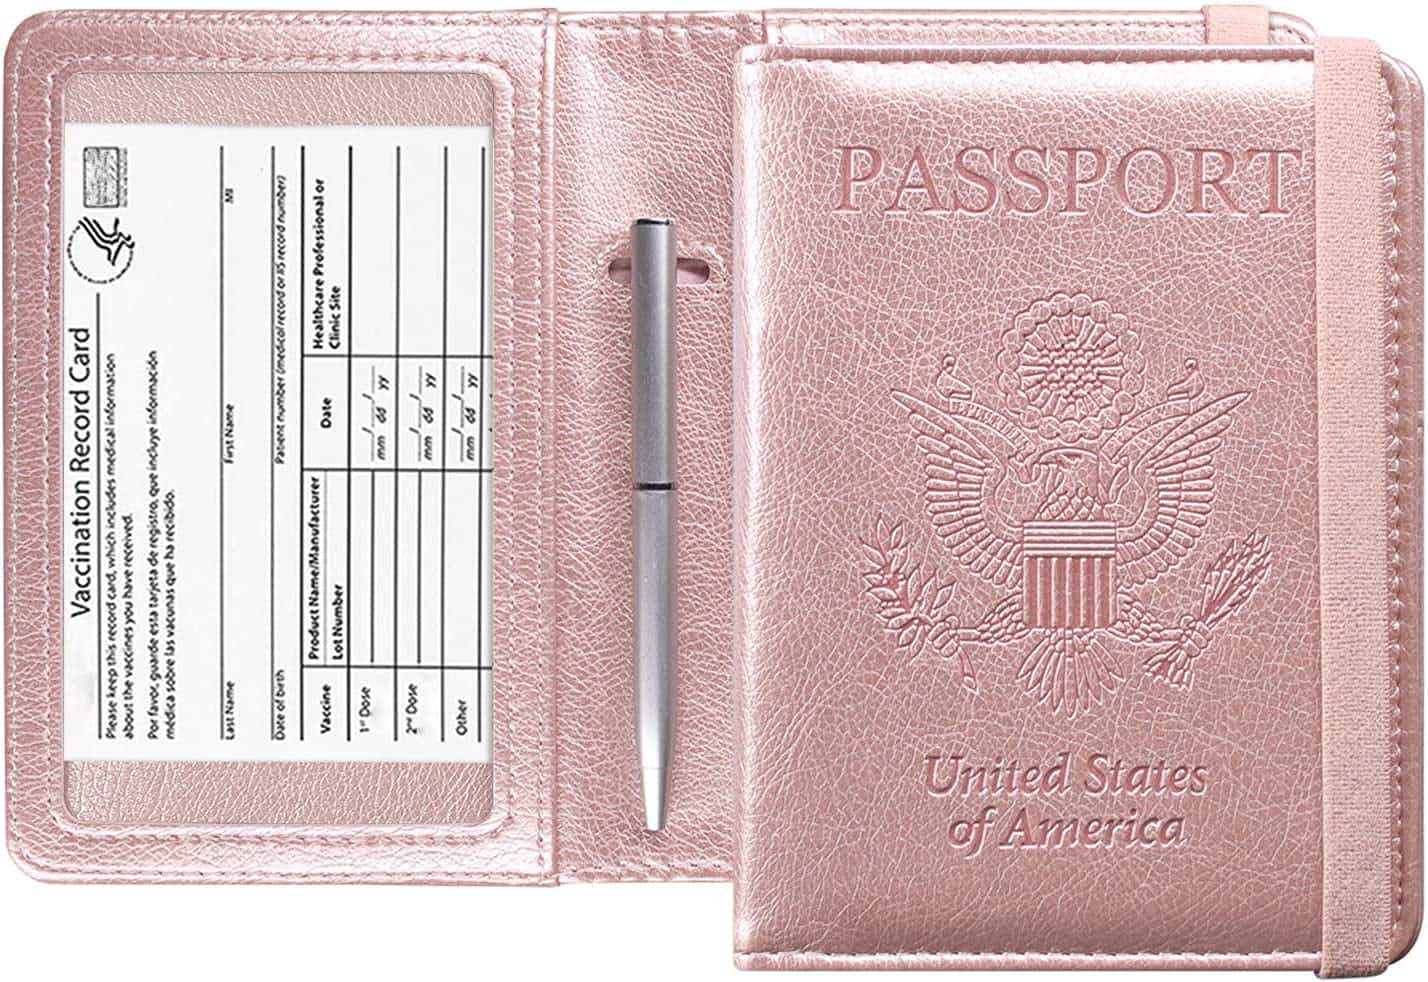 A pink passport cover with a vaccine card shown in the window pocket